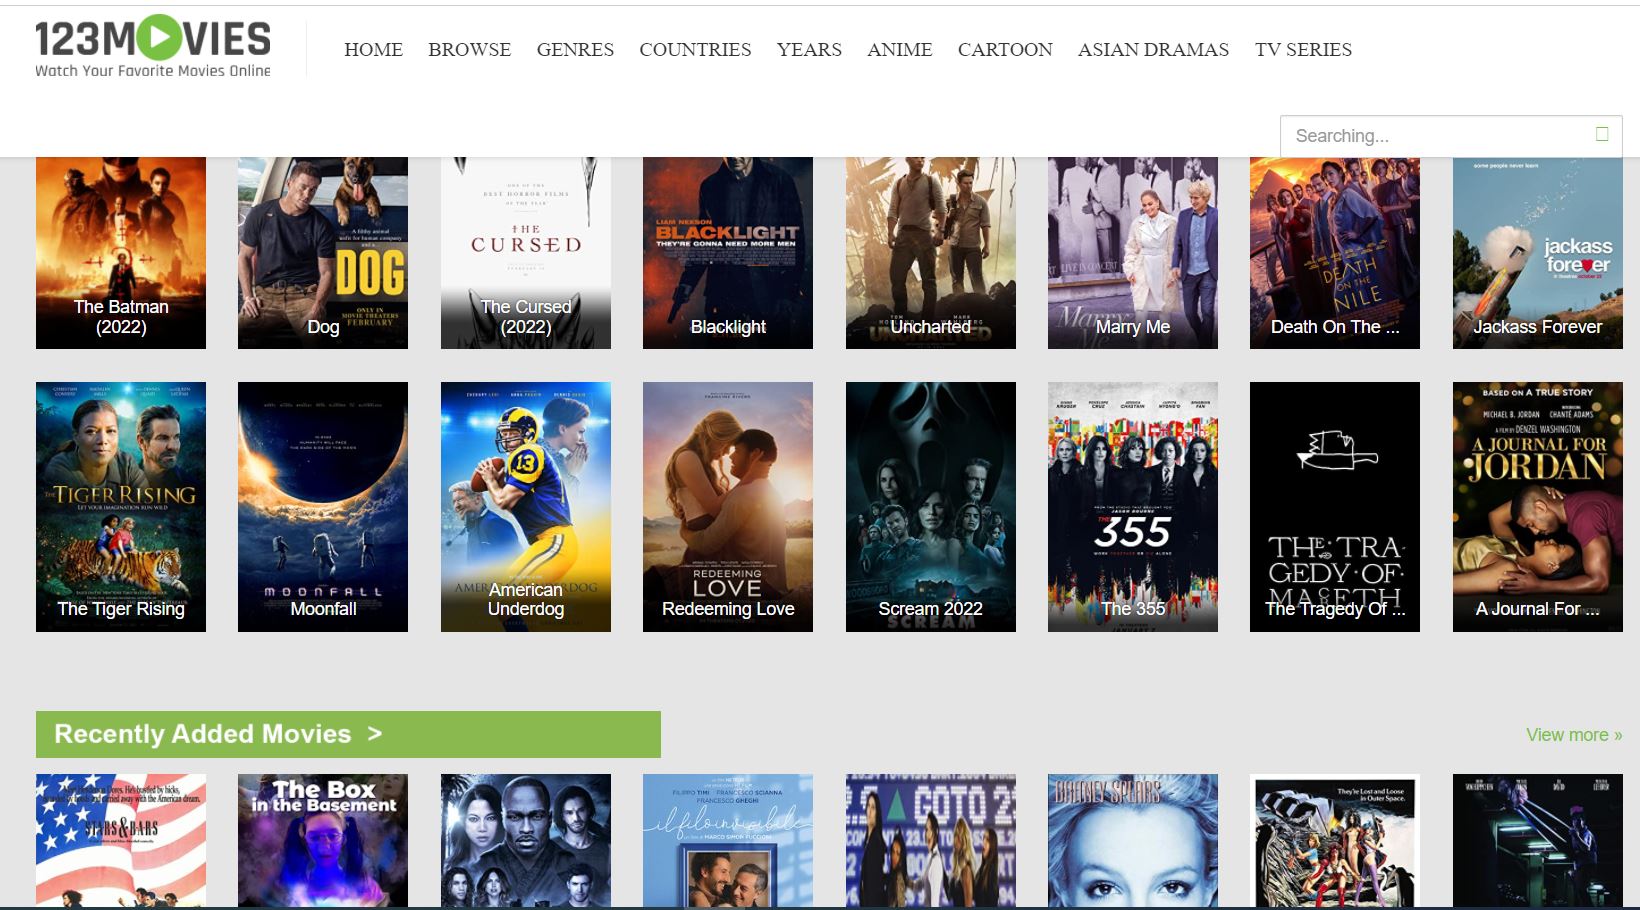 With E123movies You Can Watch Free Full HD Movies, TV Series, Asian Dramas, Anime And Cartoons Online For Free